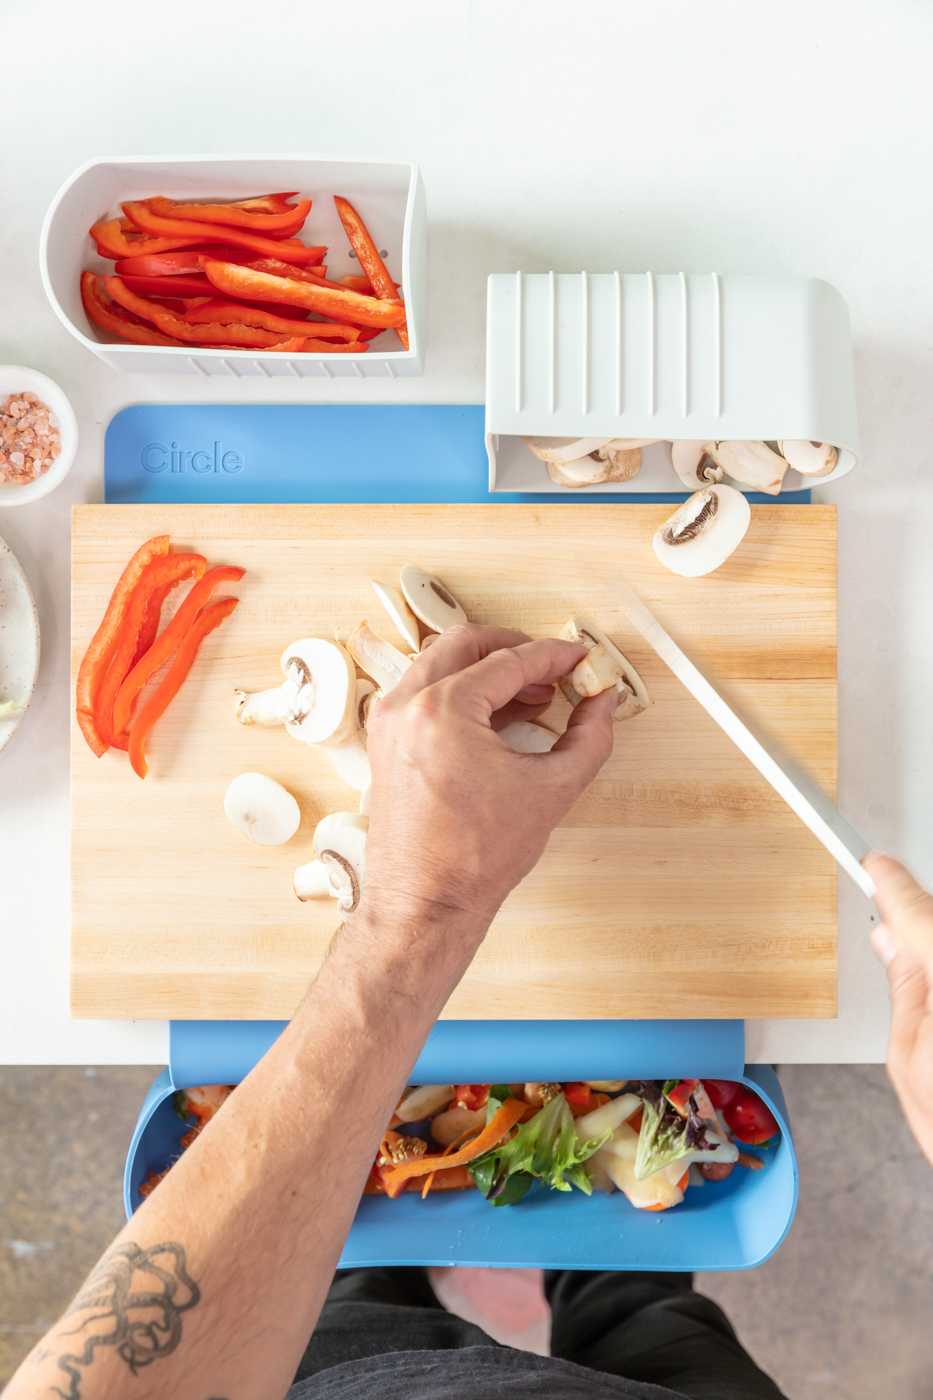 Use any chopping board with the PrepSmart prep deck station